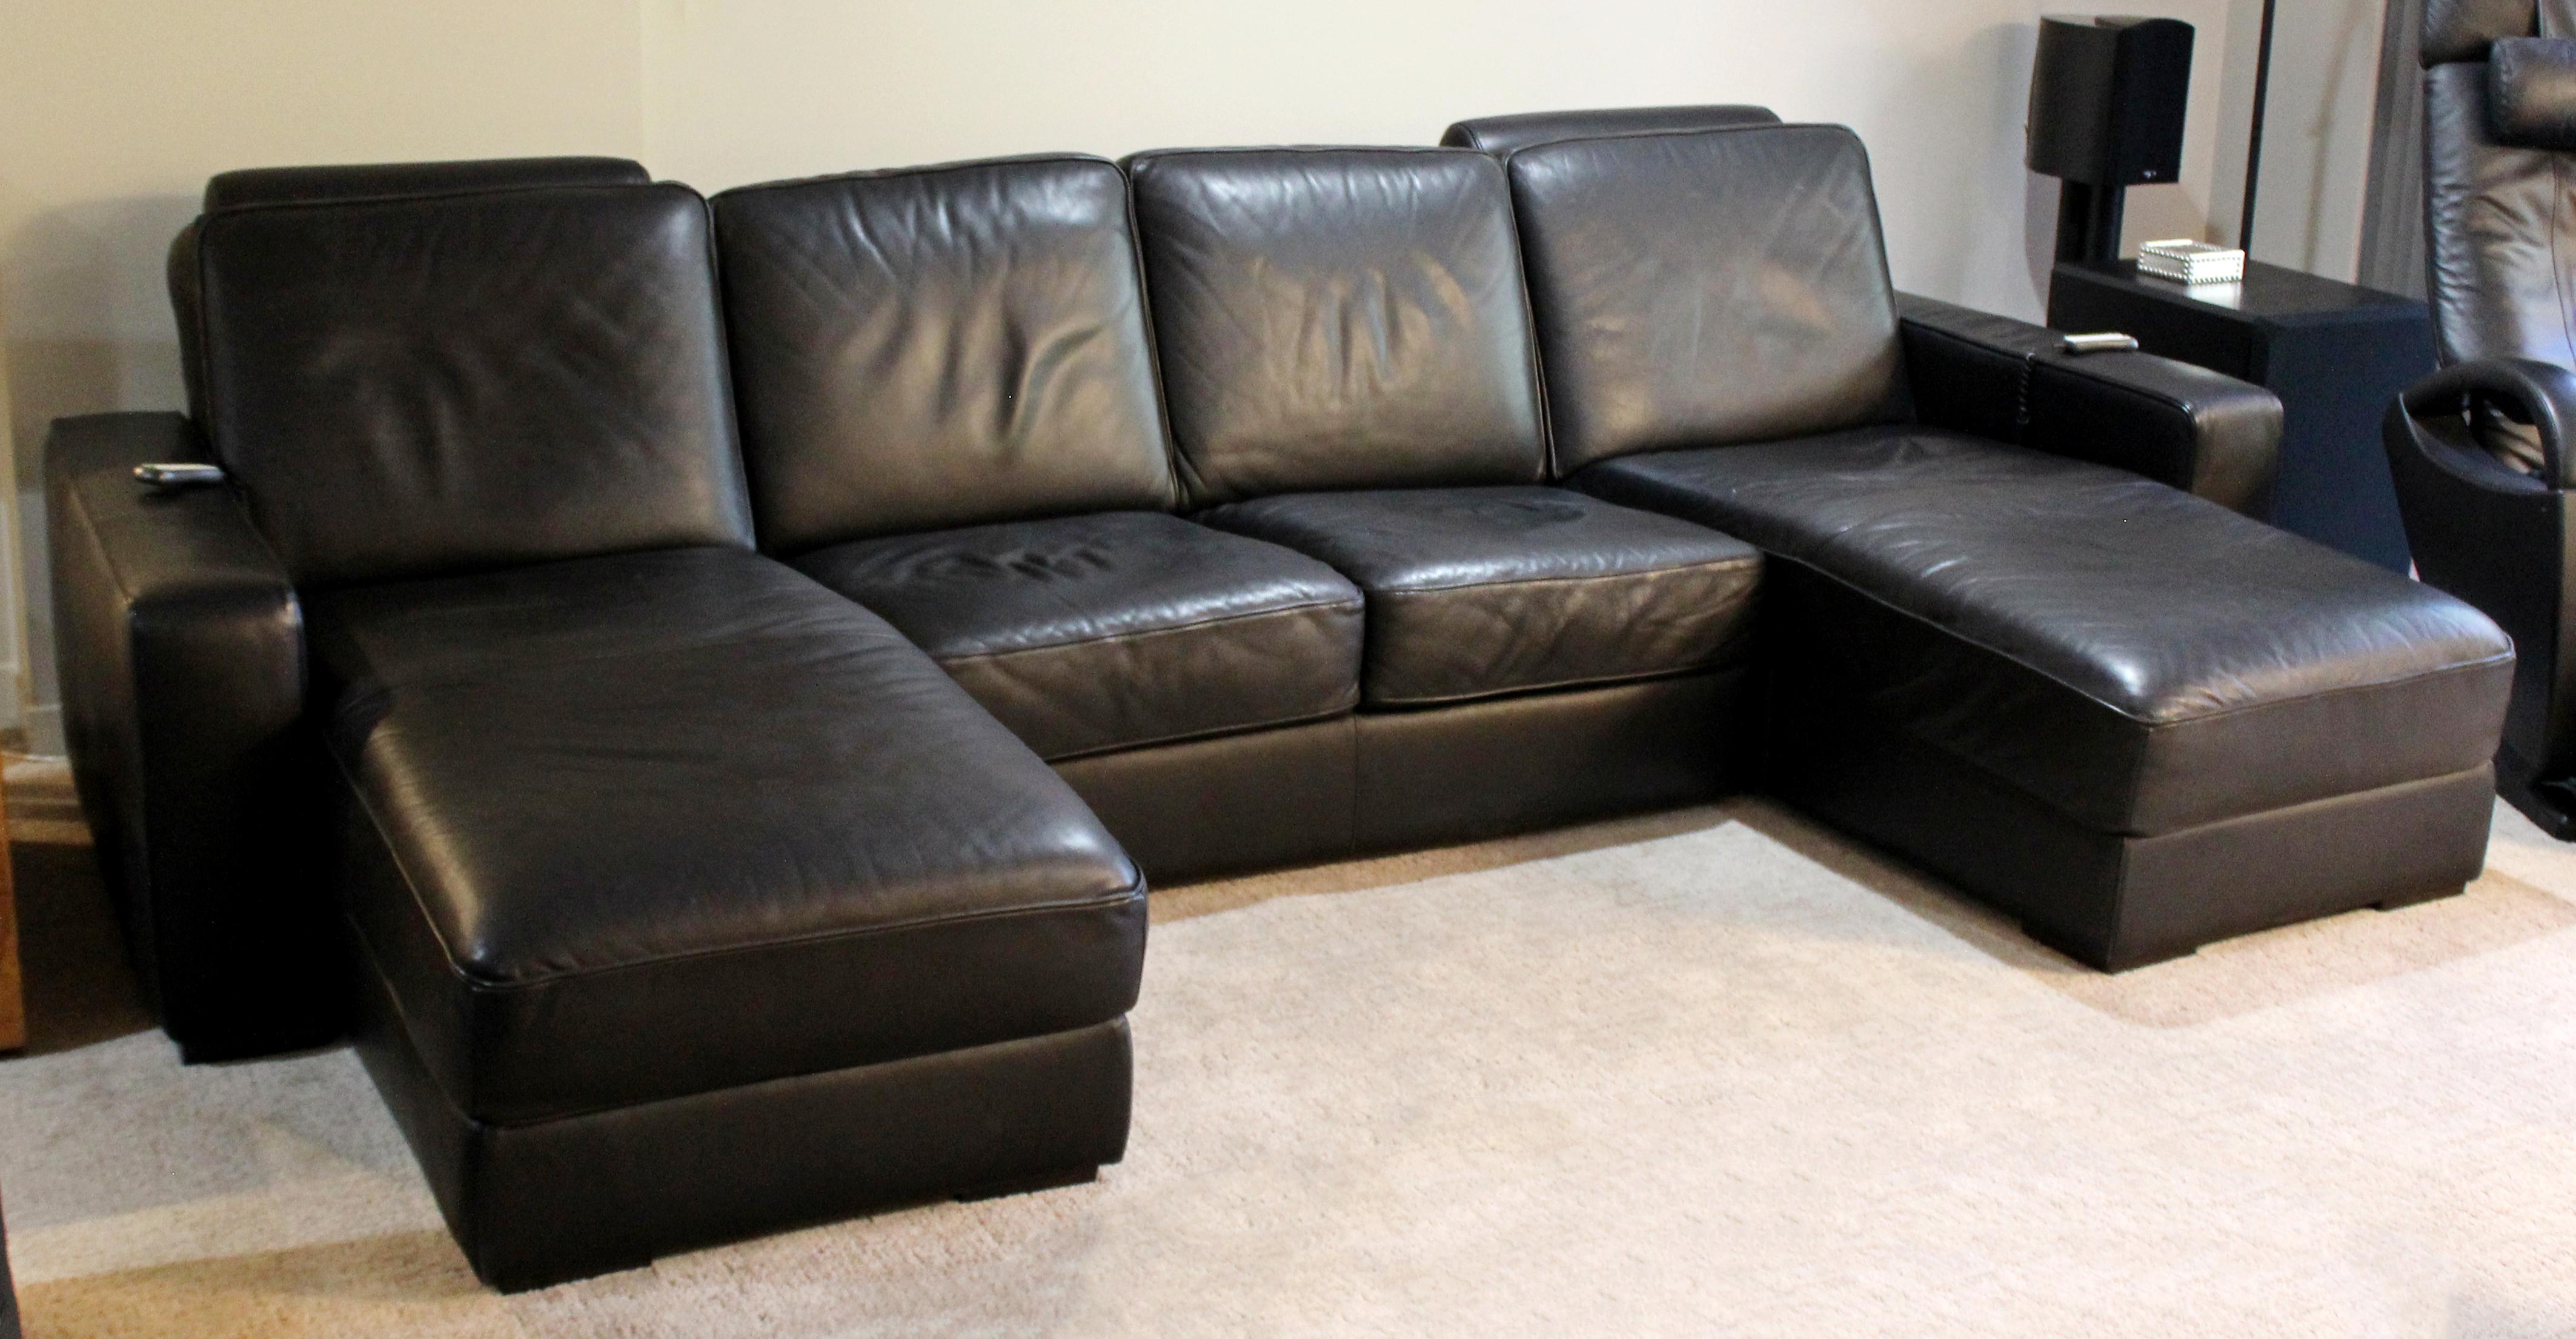 For your consideration is a Natuzzi, black leather, two-seat sectional sofa, with a pair of matching chaises, circa 1980s. In very good condition. The dimensions are 116